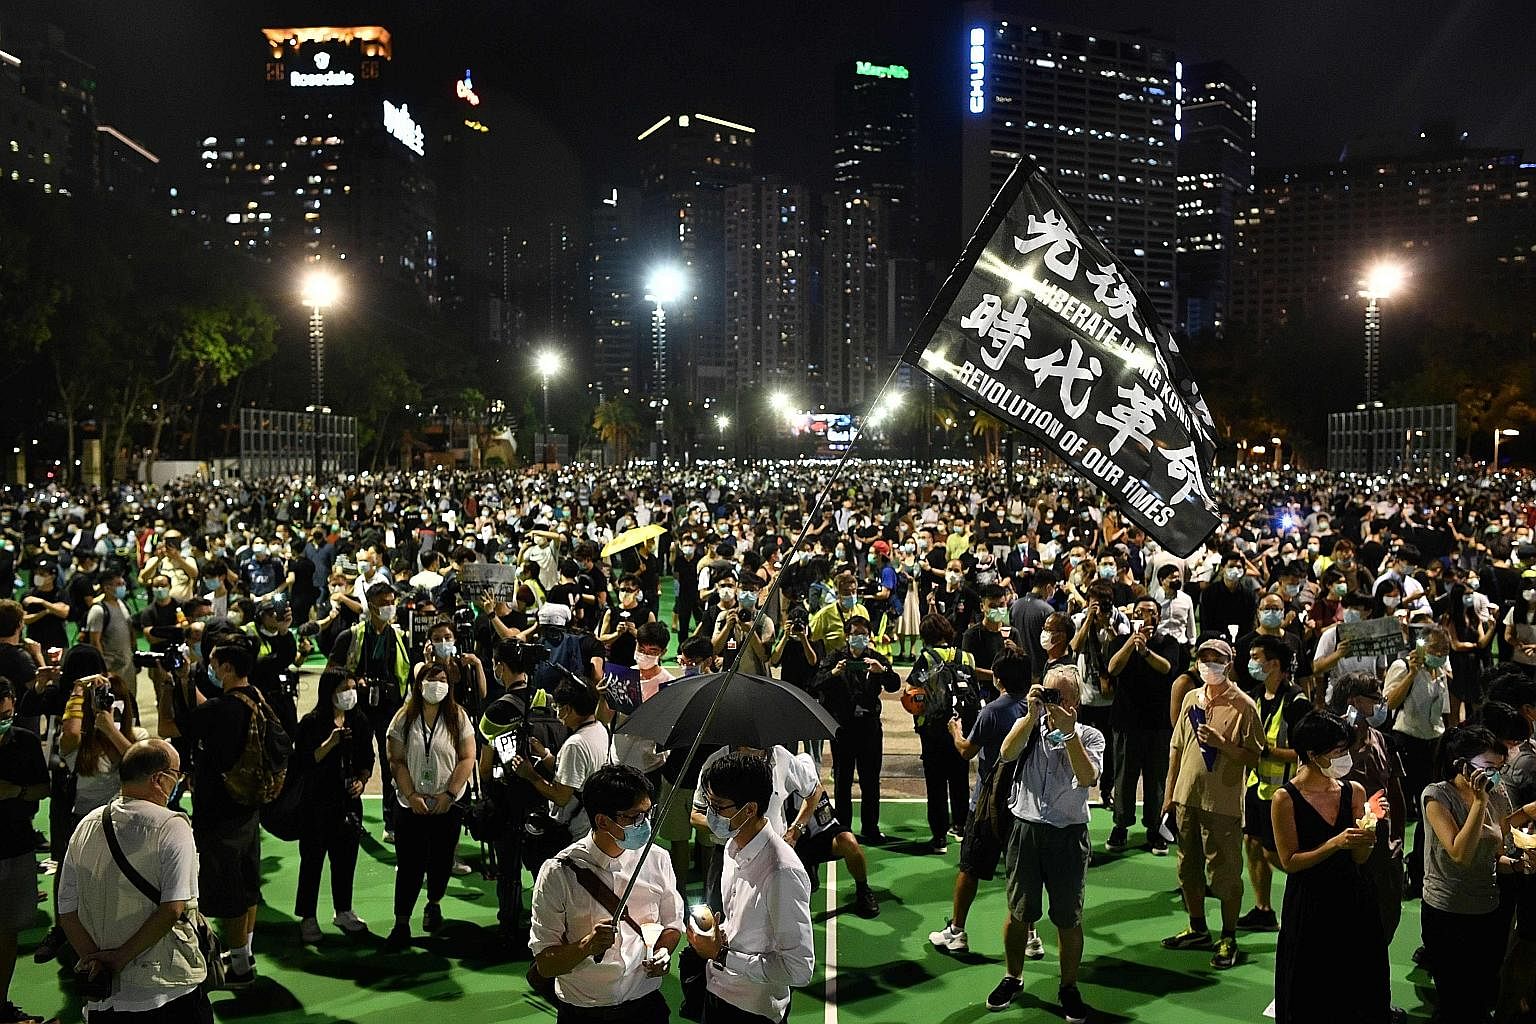 Activists at a candlelit vigil in Victoria Park in Hong Kong yesterday evening to commemorate the Tiananmen crackdown. The event had been banned due to coronavirus concerns.